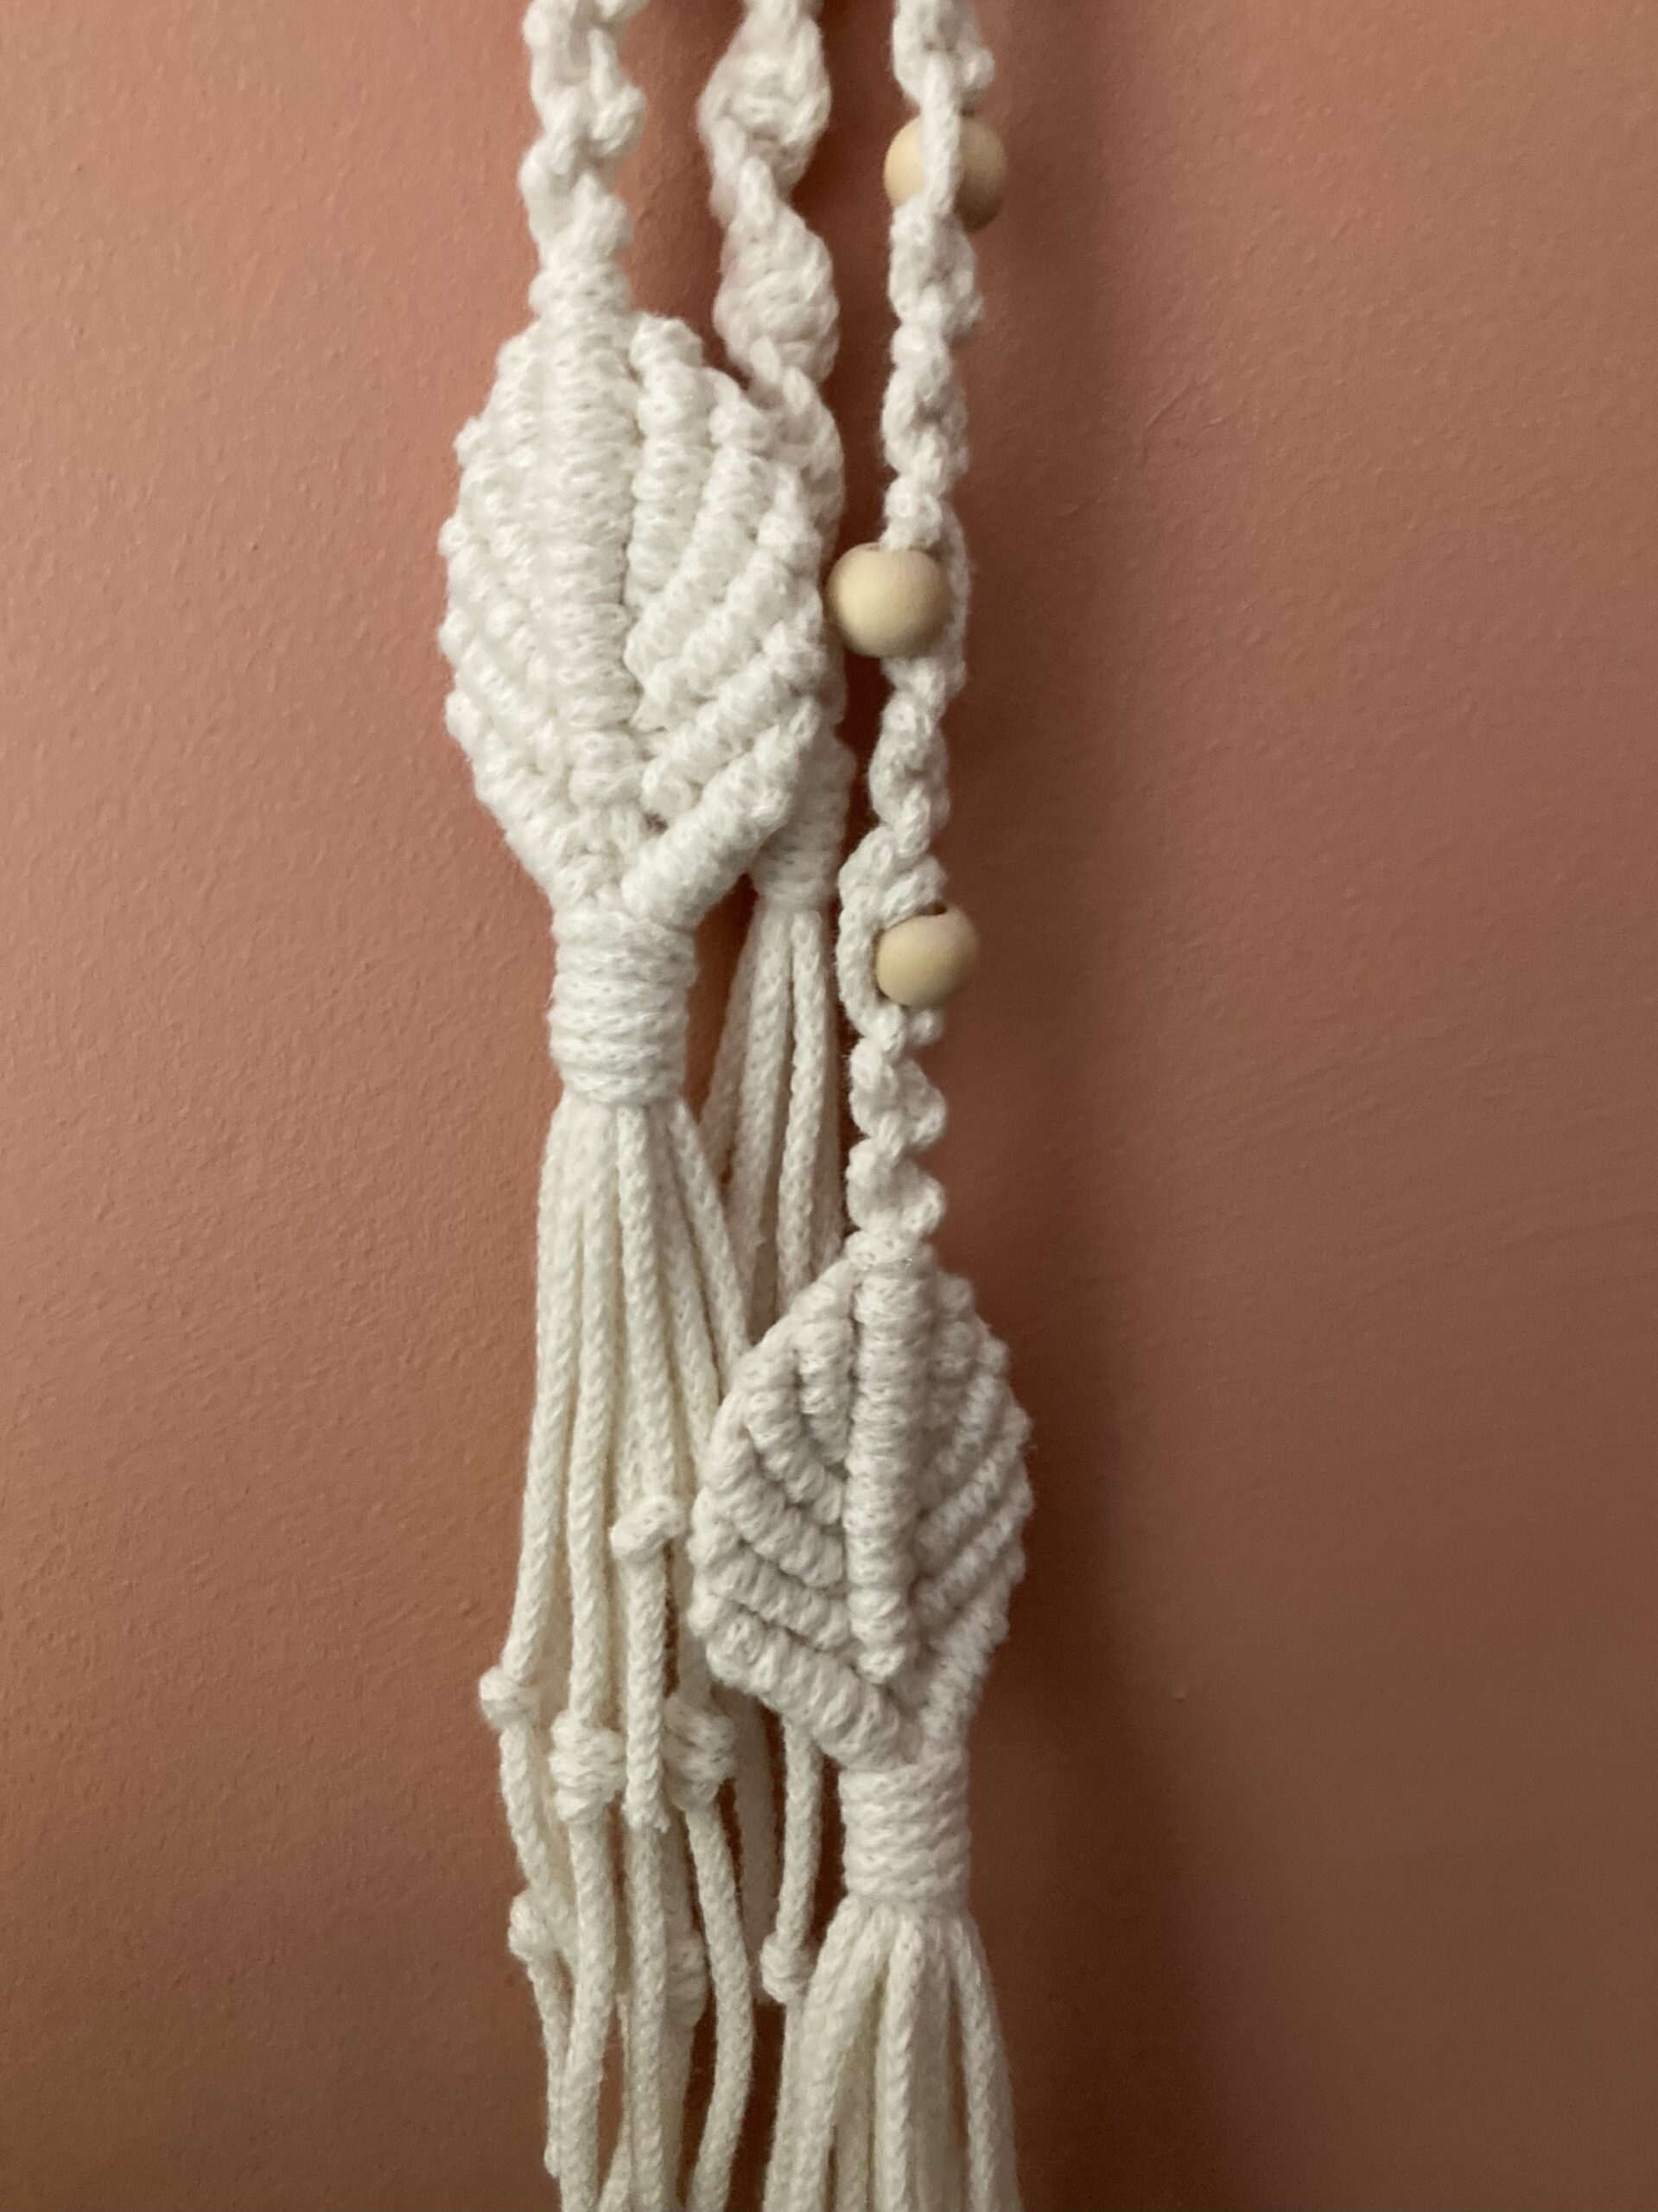 Handmade macrame wall hanging/decoration in white cord. 